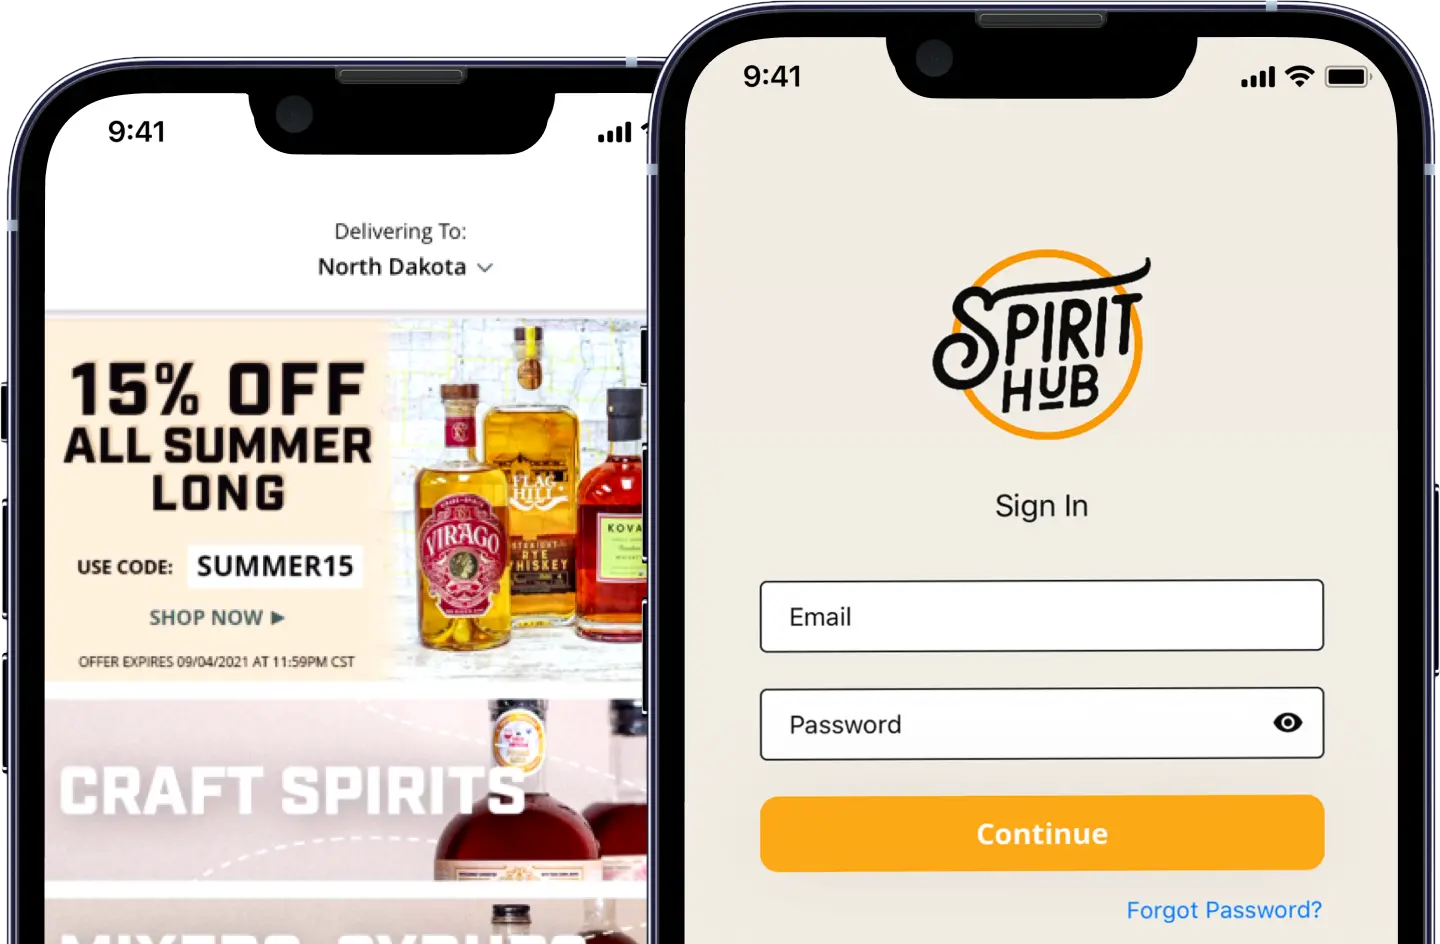 A distillery marketplace aggregator connecting wine and spirits suppliers with end consumers. They work first hand with the distilleries which means that the independent distilleries are being supported and orders are being shipped faster